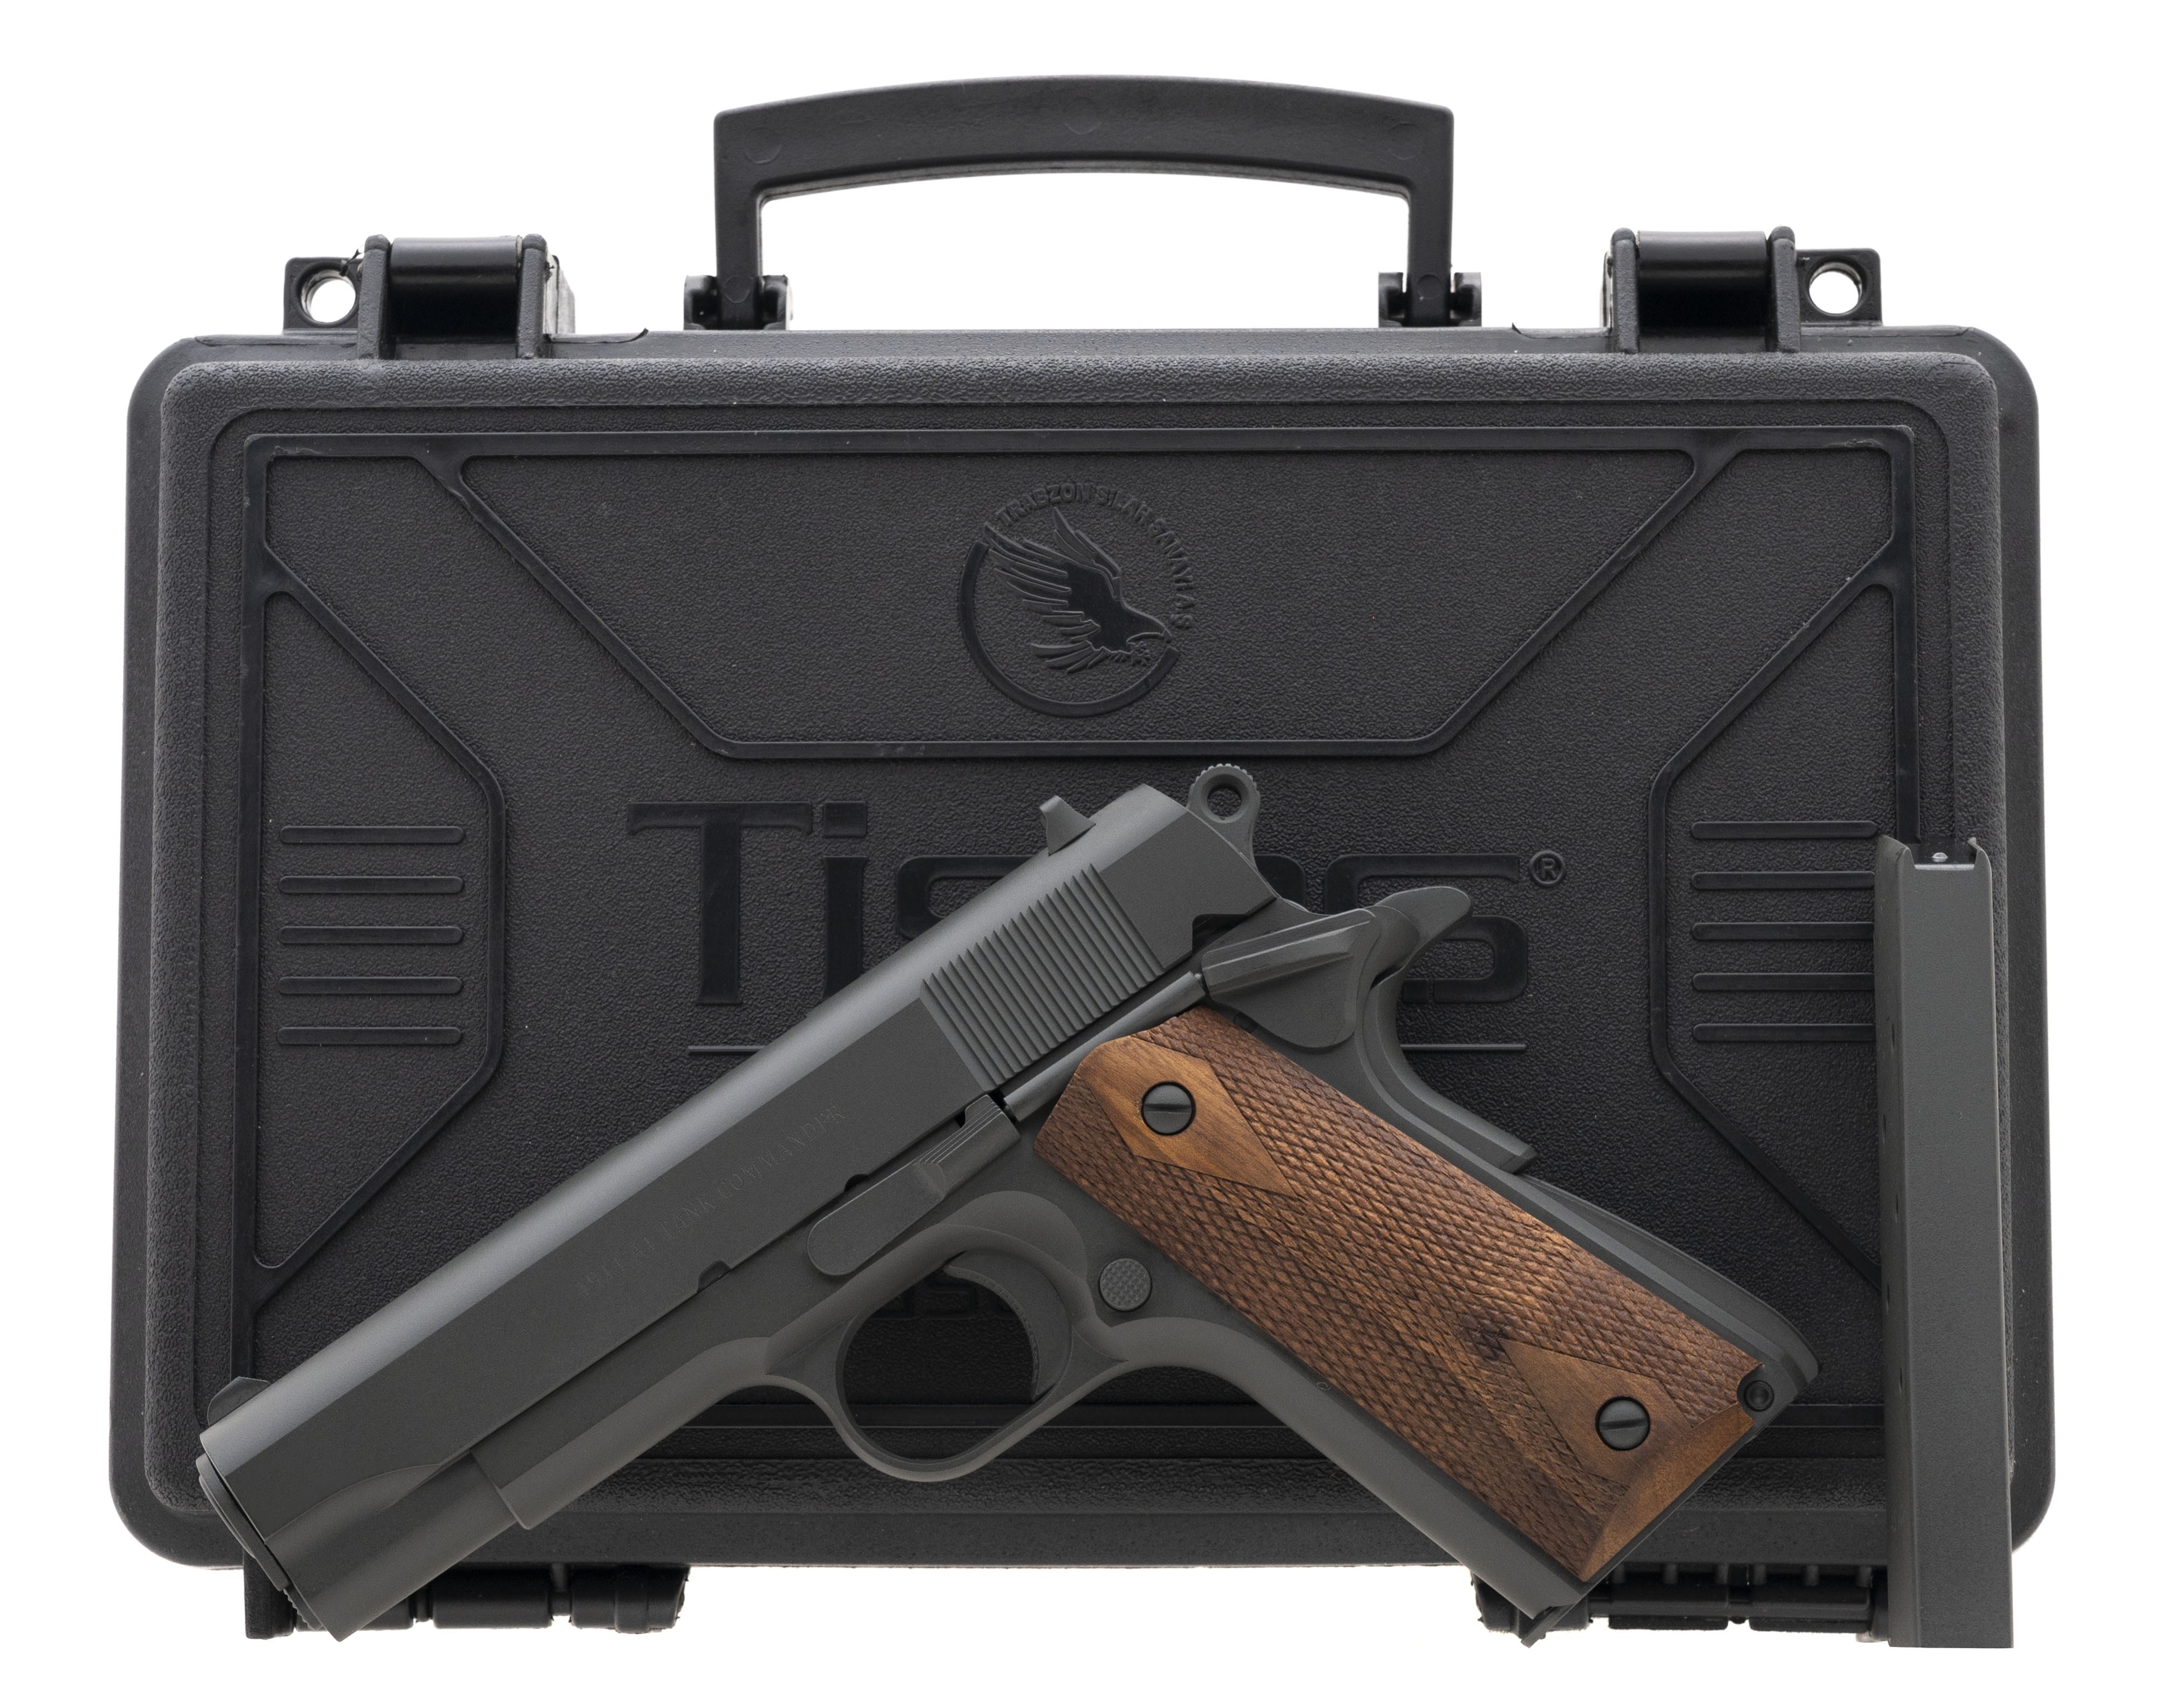 Parkerized commander sized 1911 with 4.25" barrel, fixed iron sights, ...